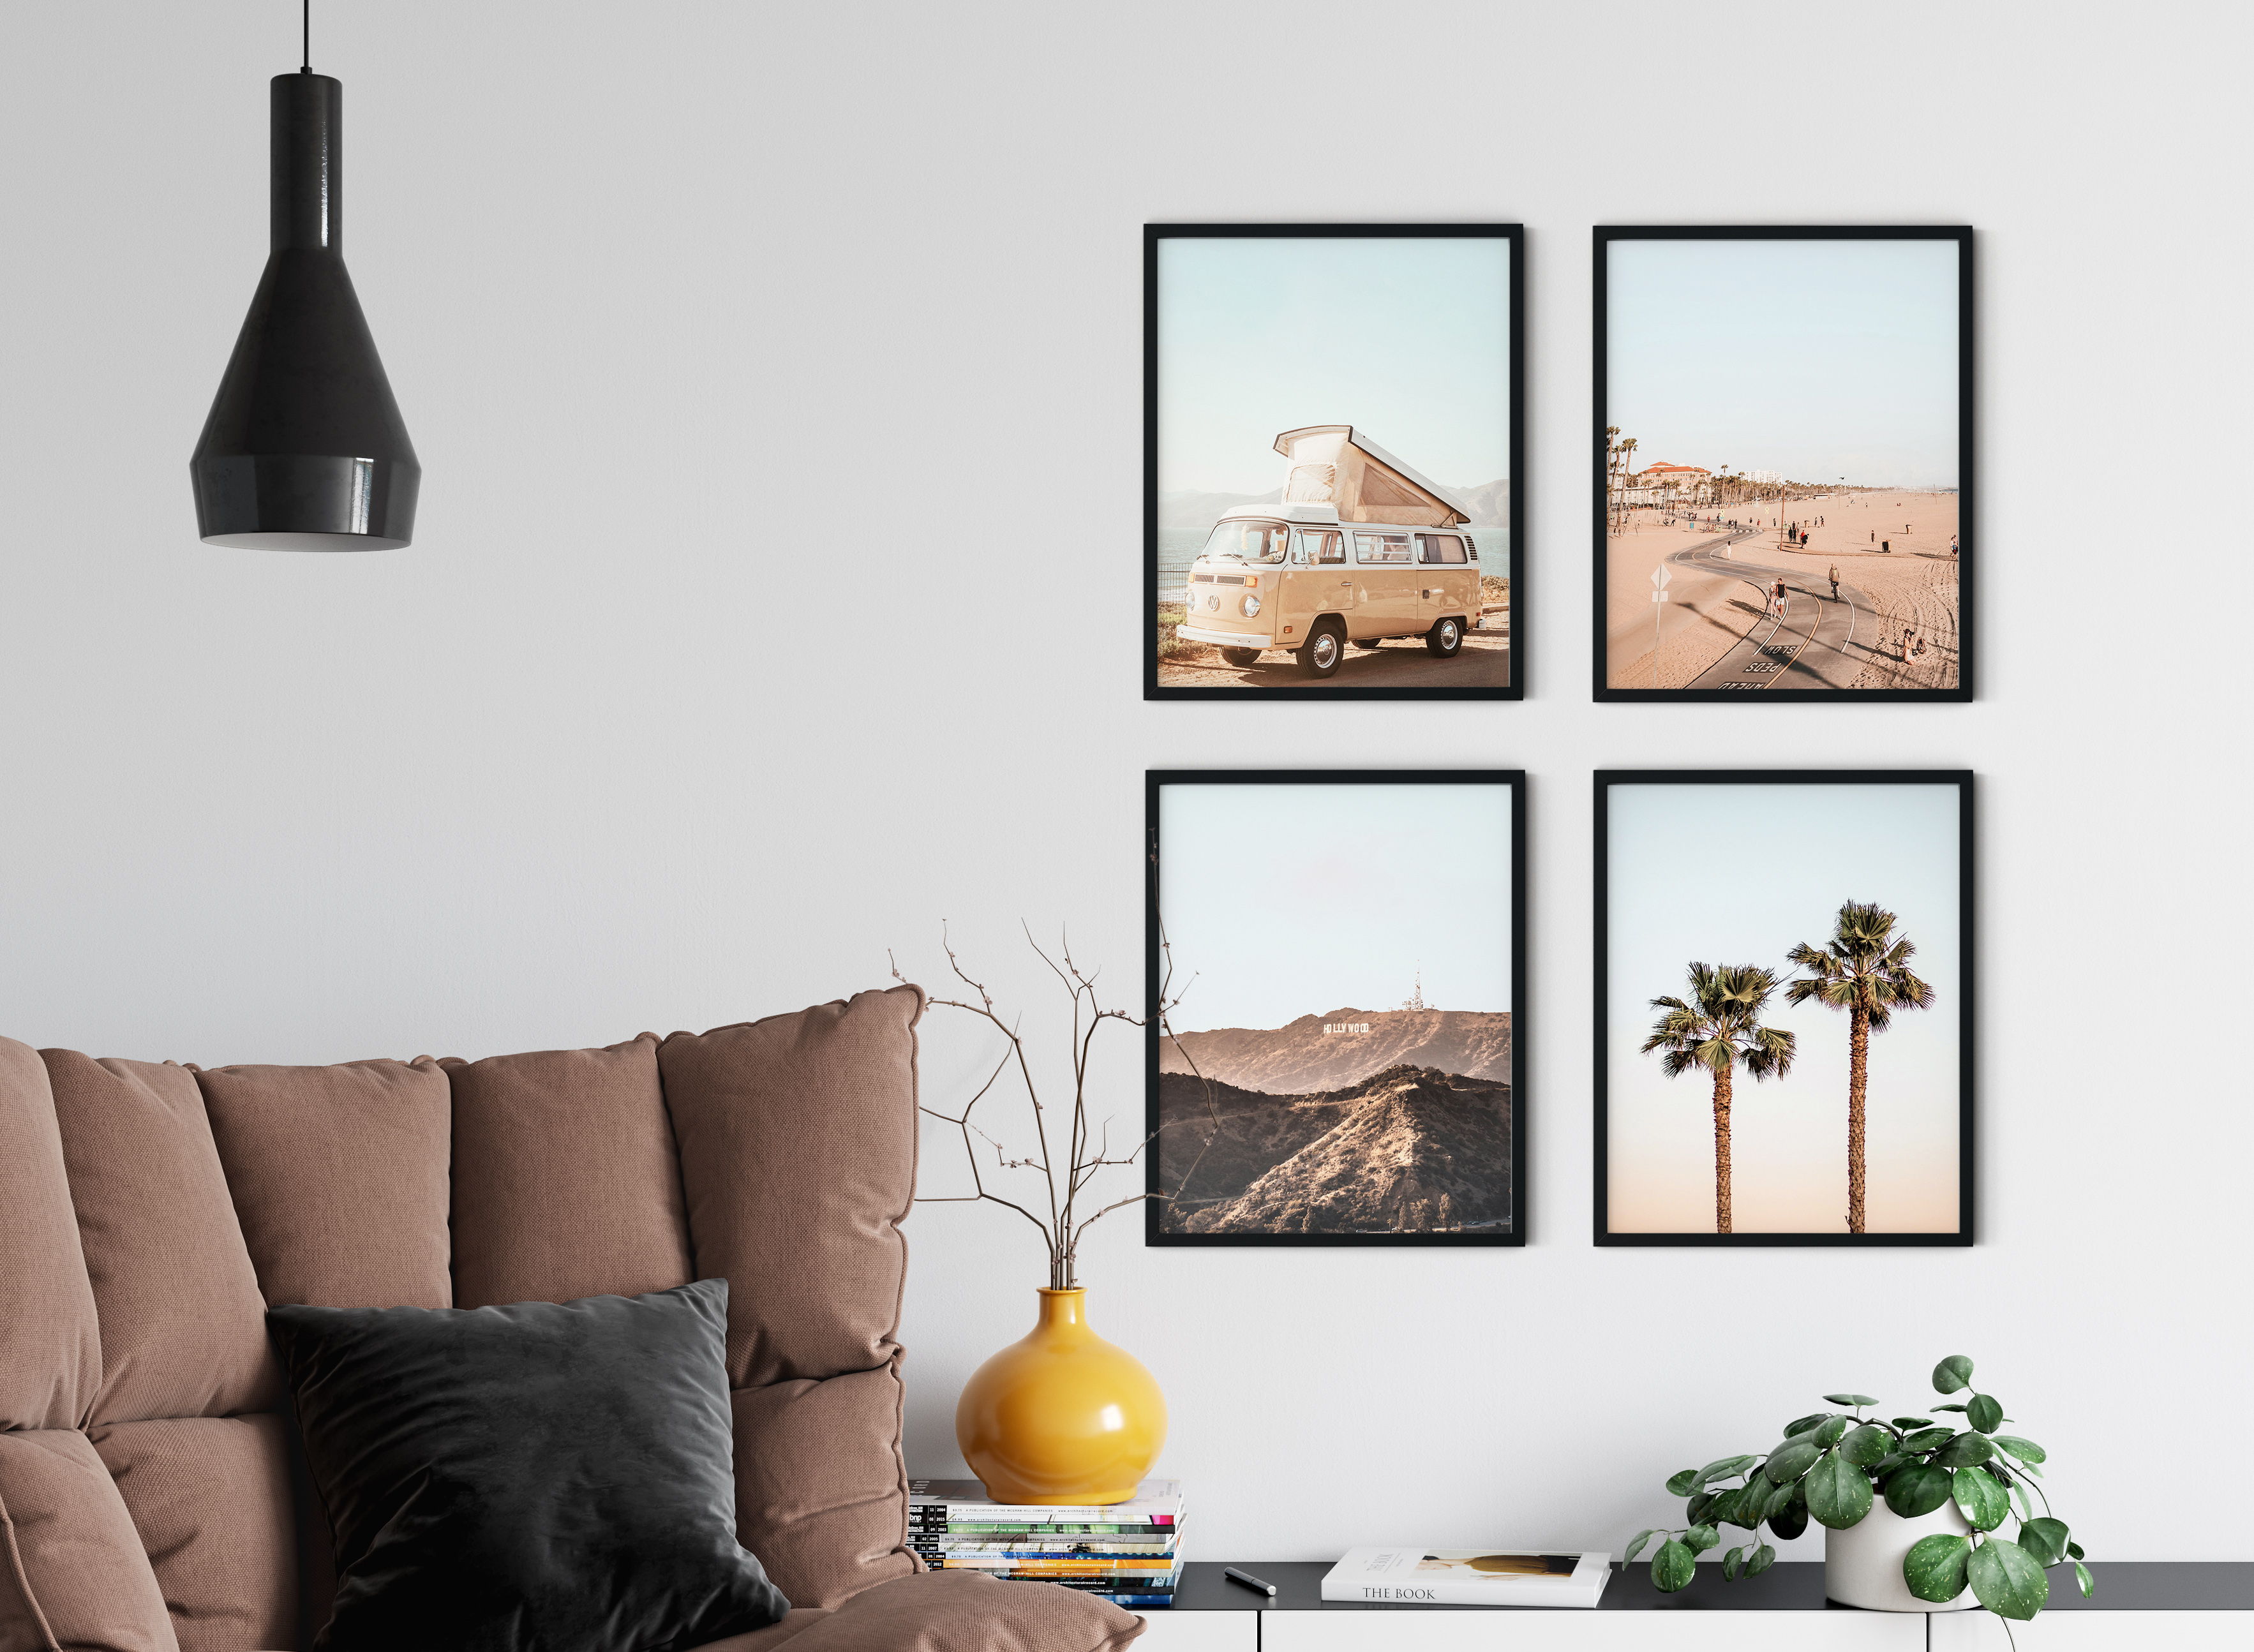 Haus and Hues Beach Decor and Art Prints Set of Coastal Decor, Beach  Art Prints, Desert Beach Wall Decor for Home UNFRAMED, 8”x10” 